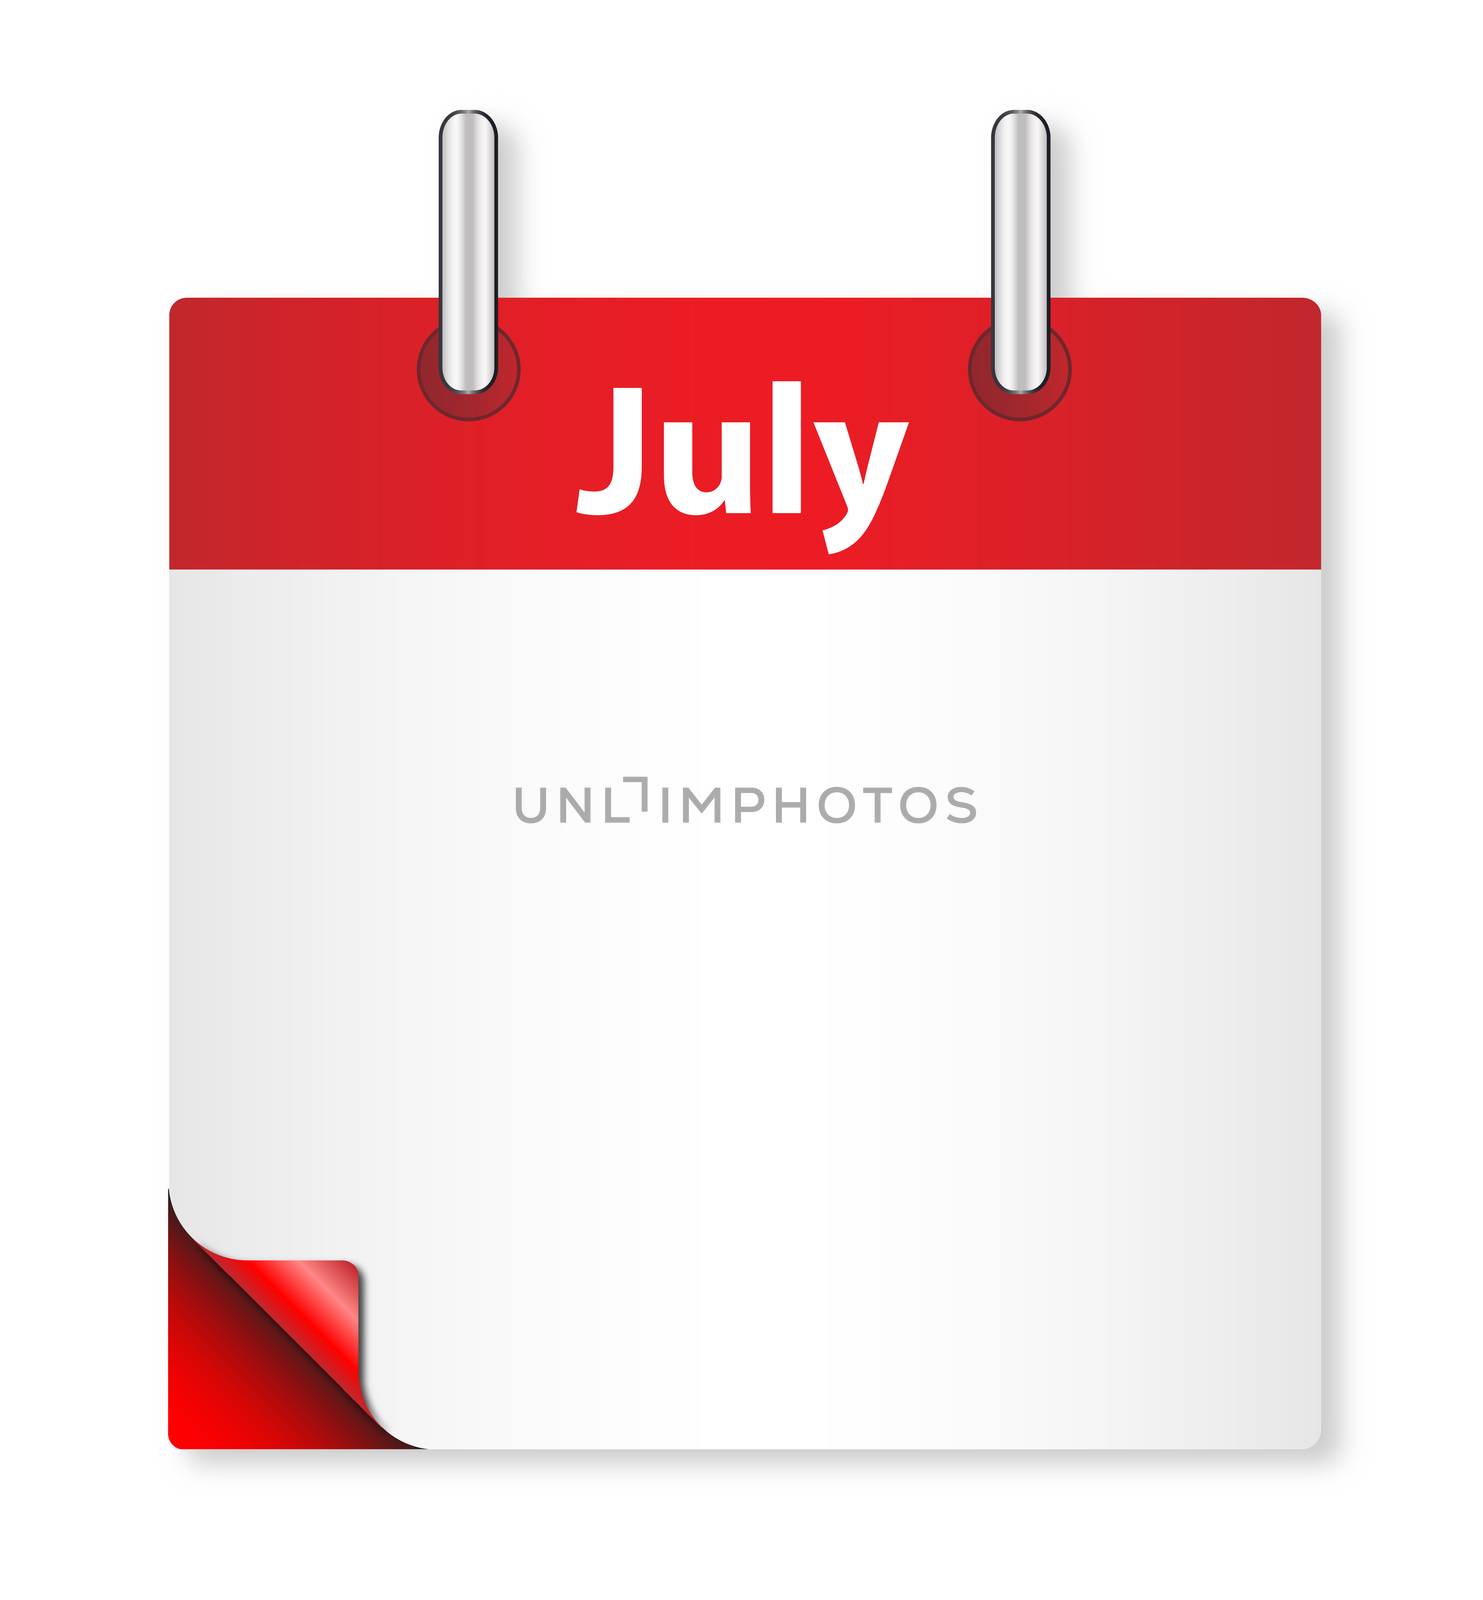 A calender date offering a blank July page over white